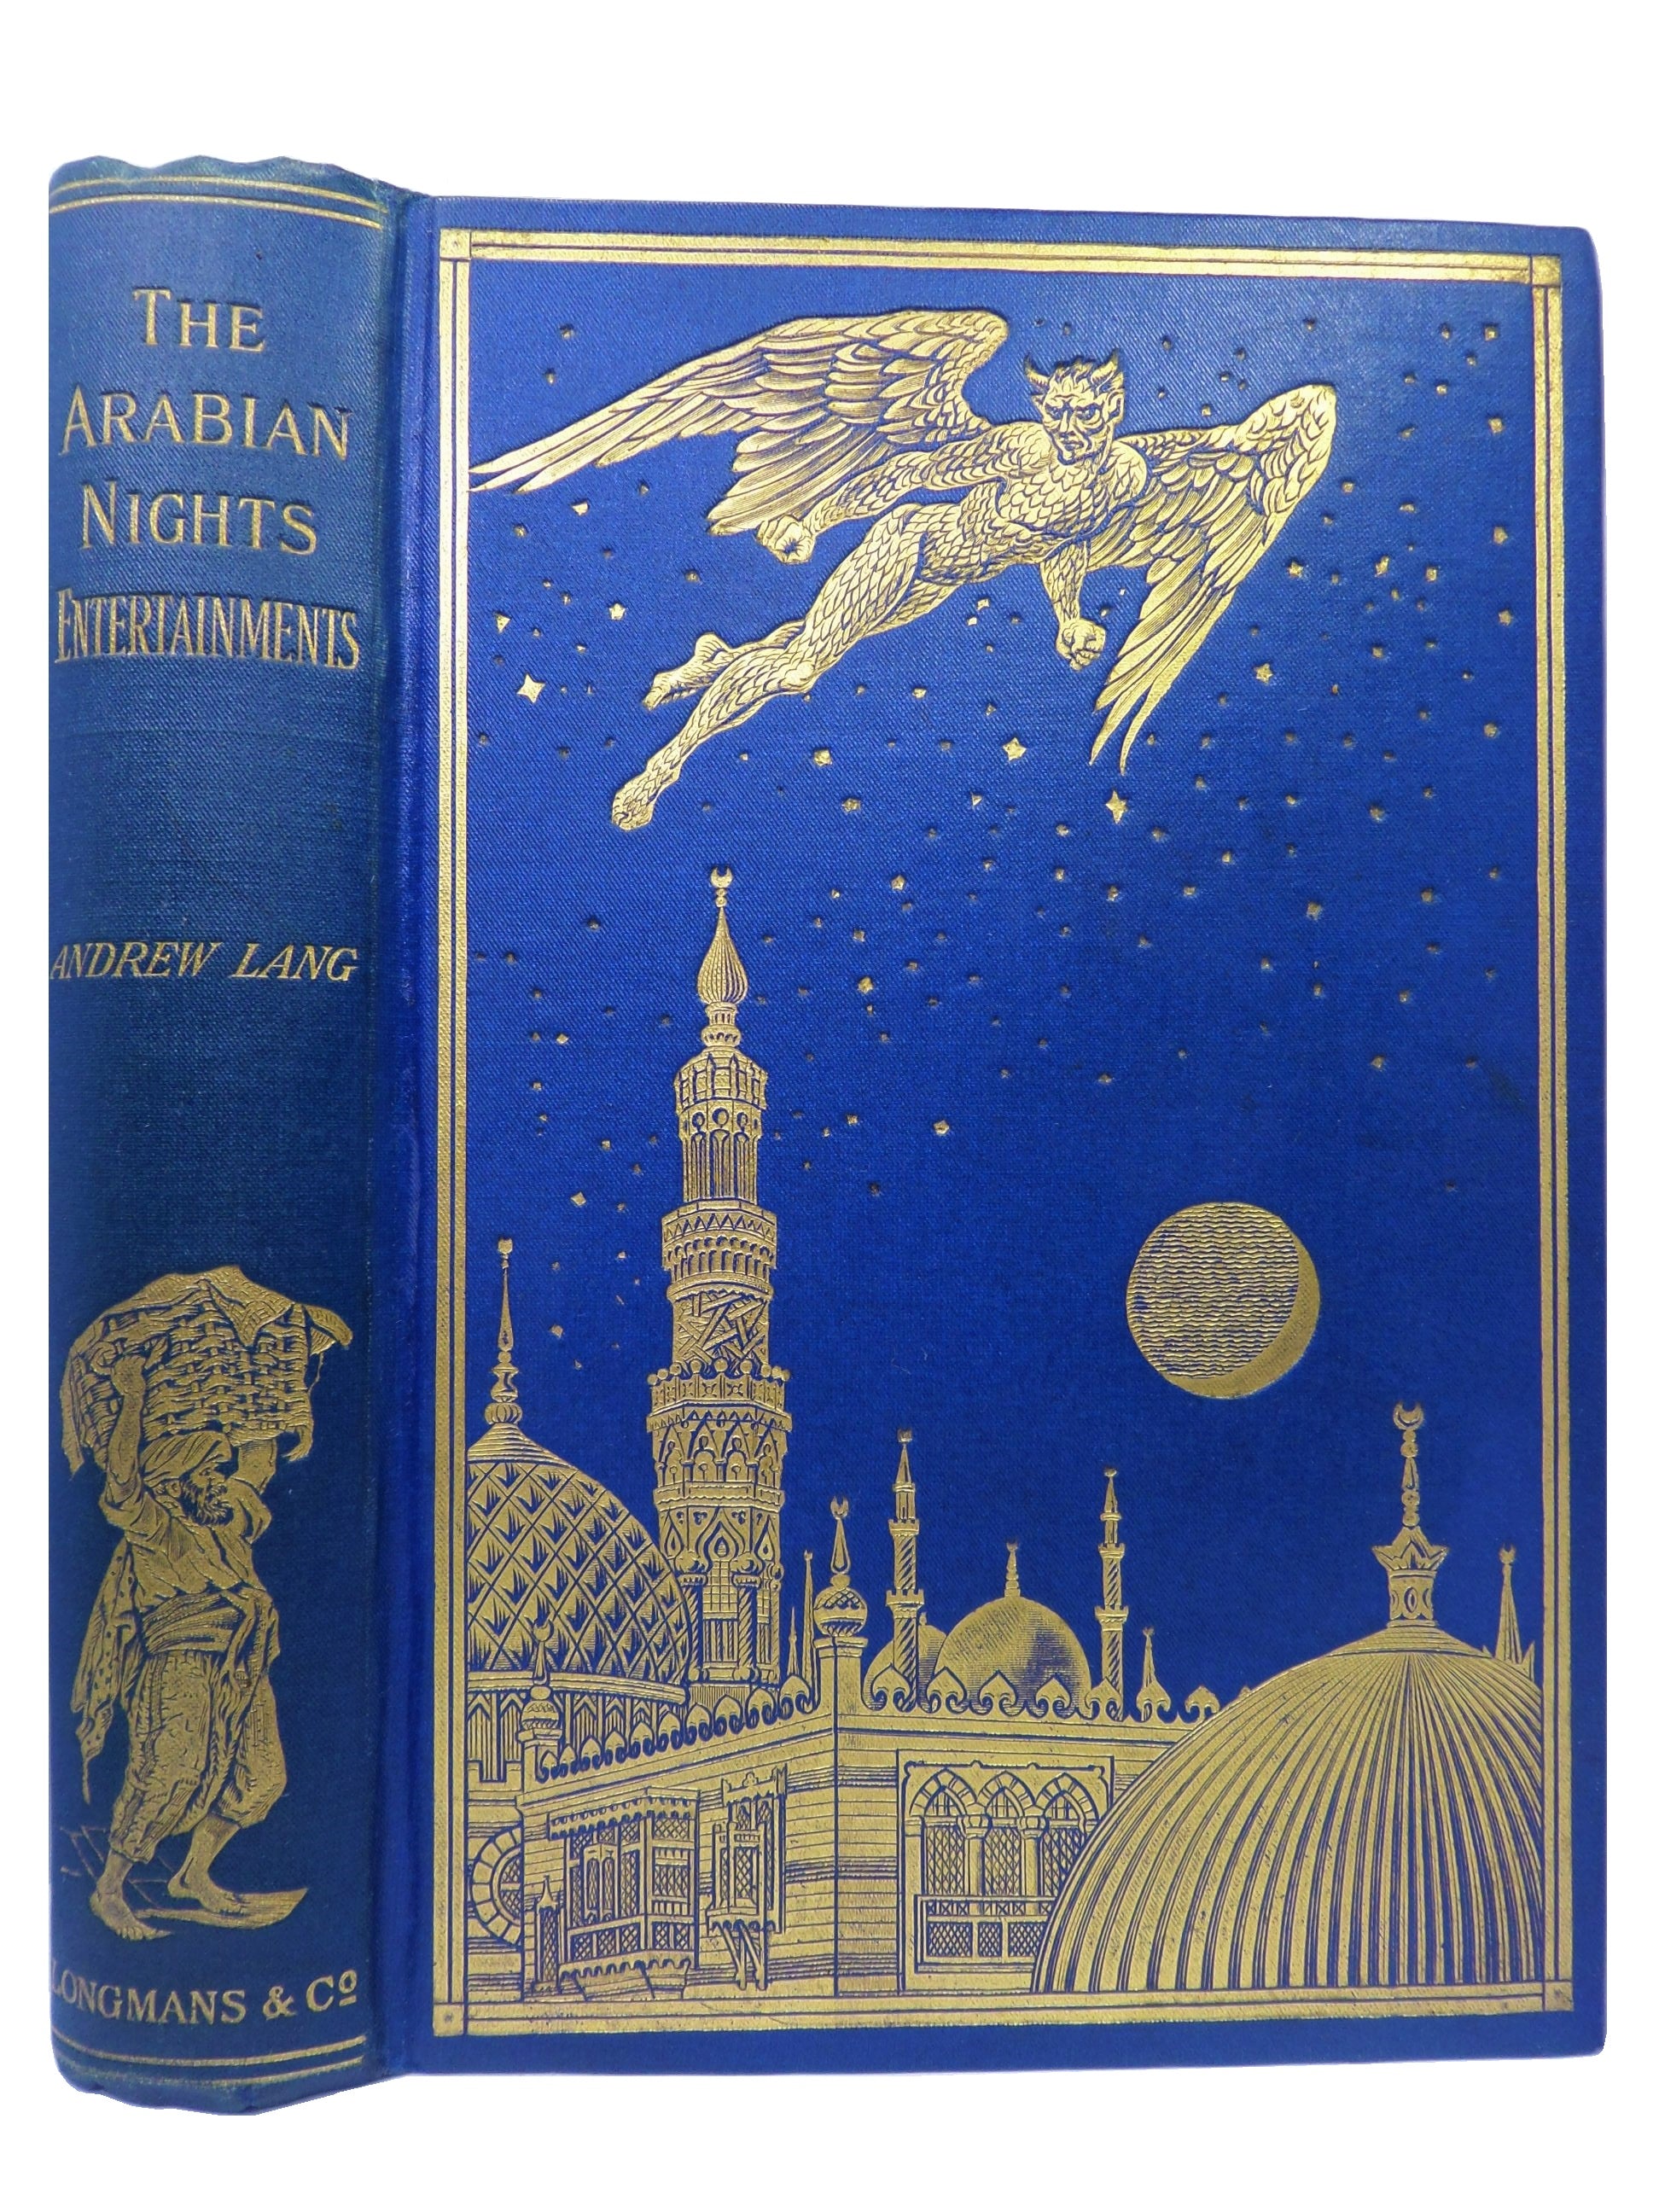 THE ARABIAN NIGHTS ENTERTAINMENTS BY ANDREW LANG 1898 FIRST EDITION